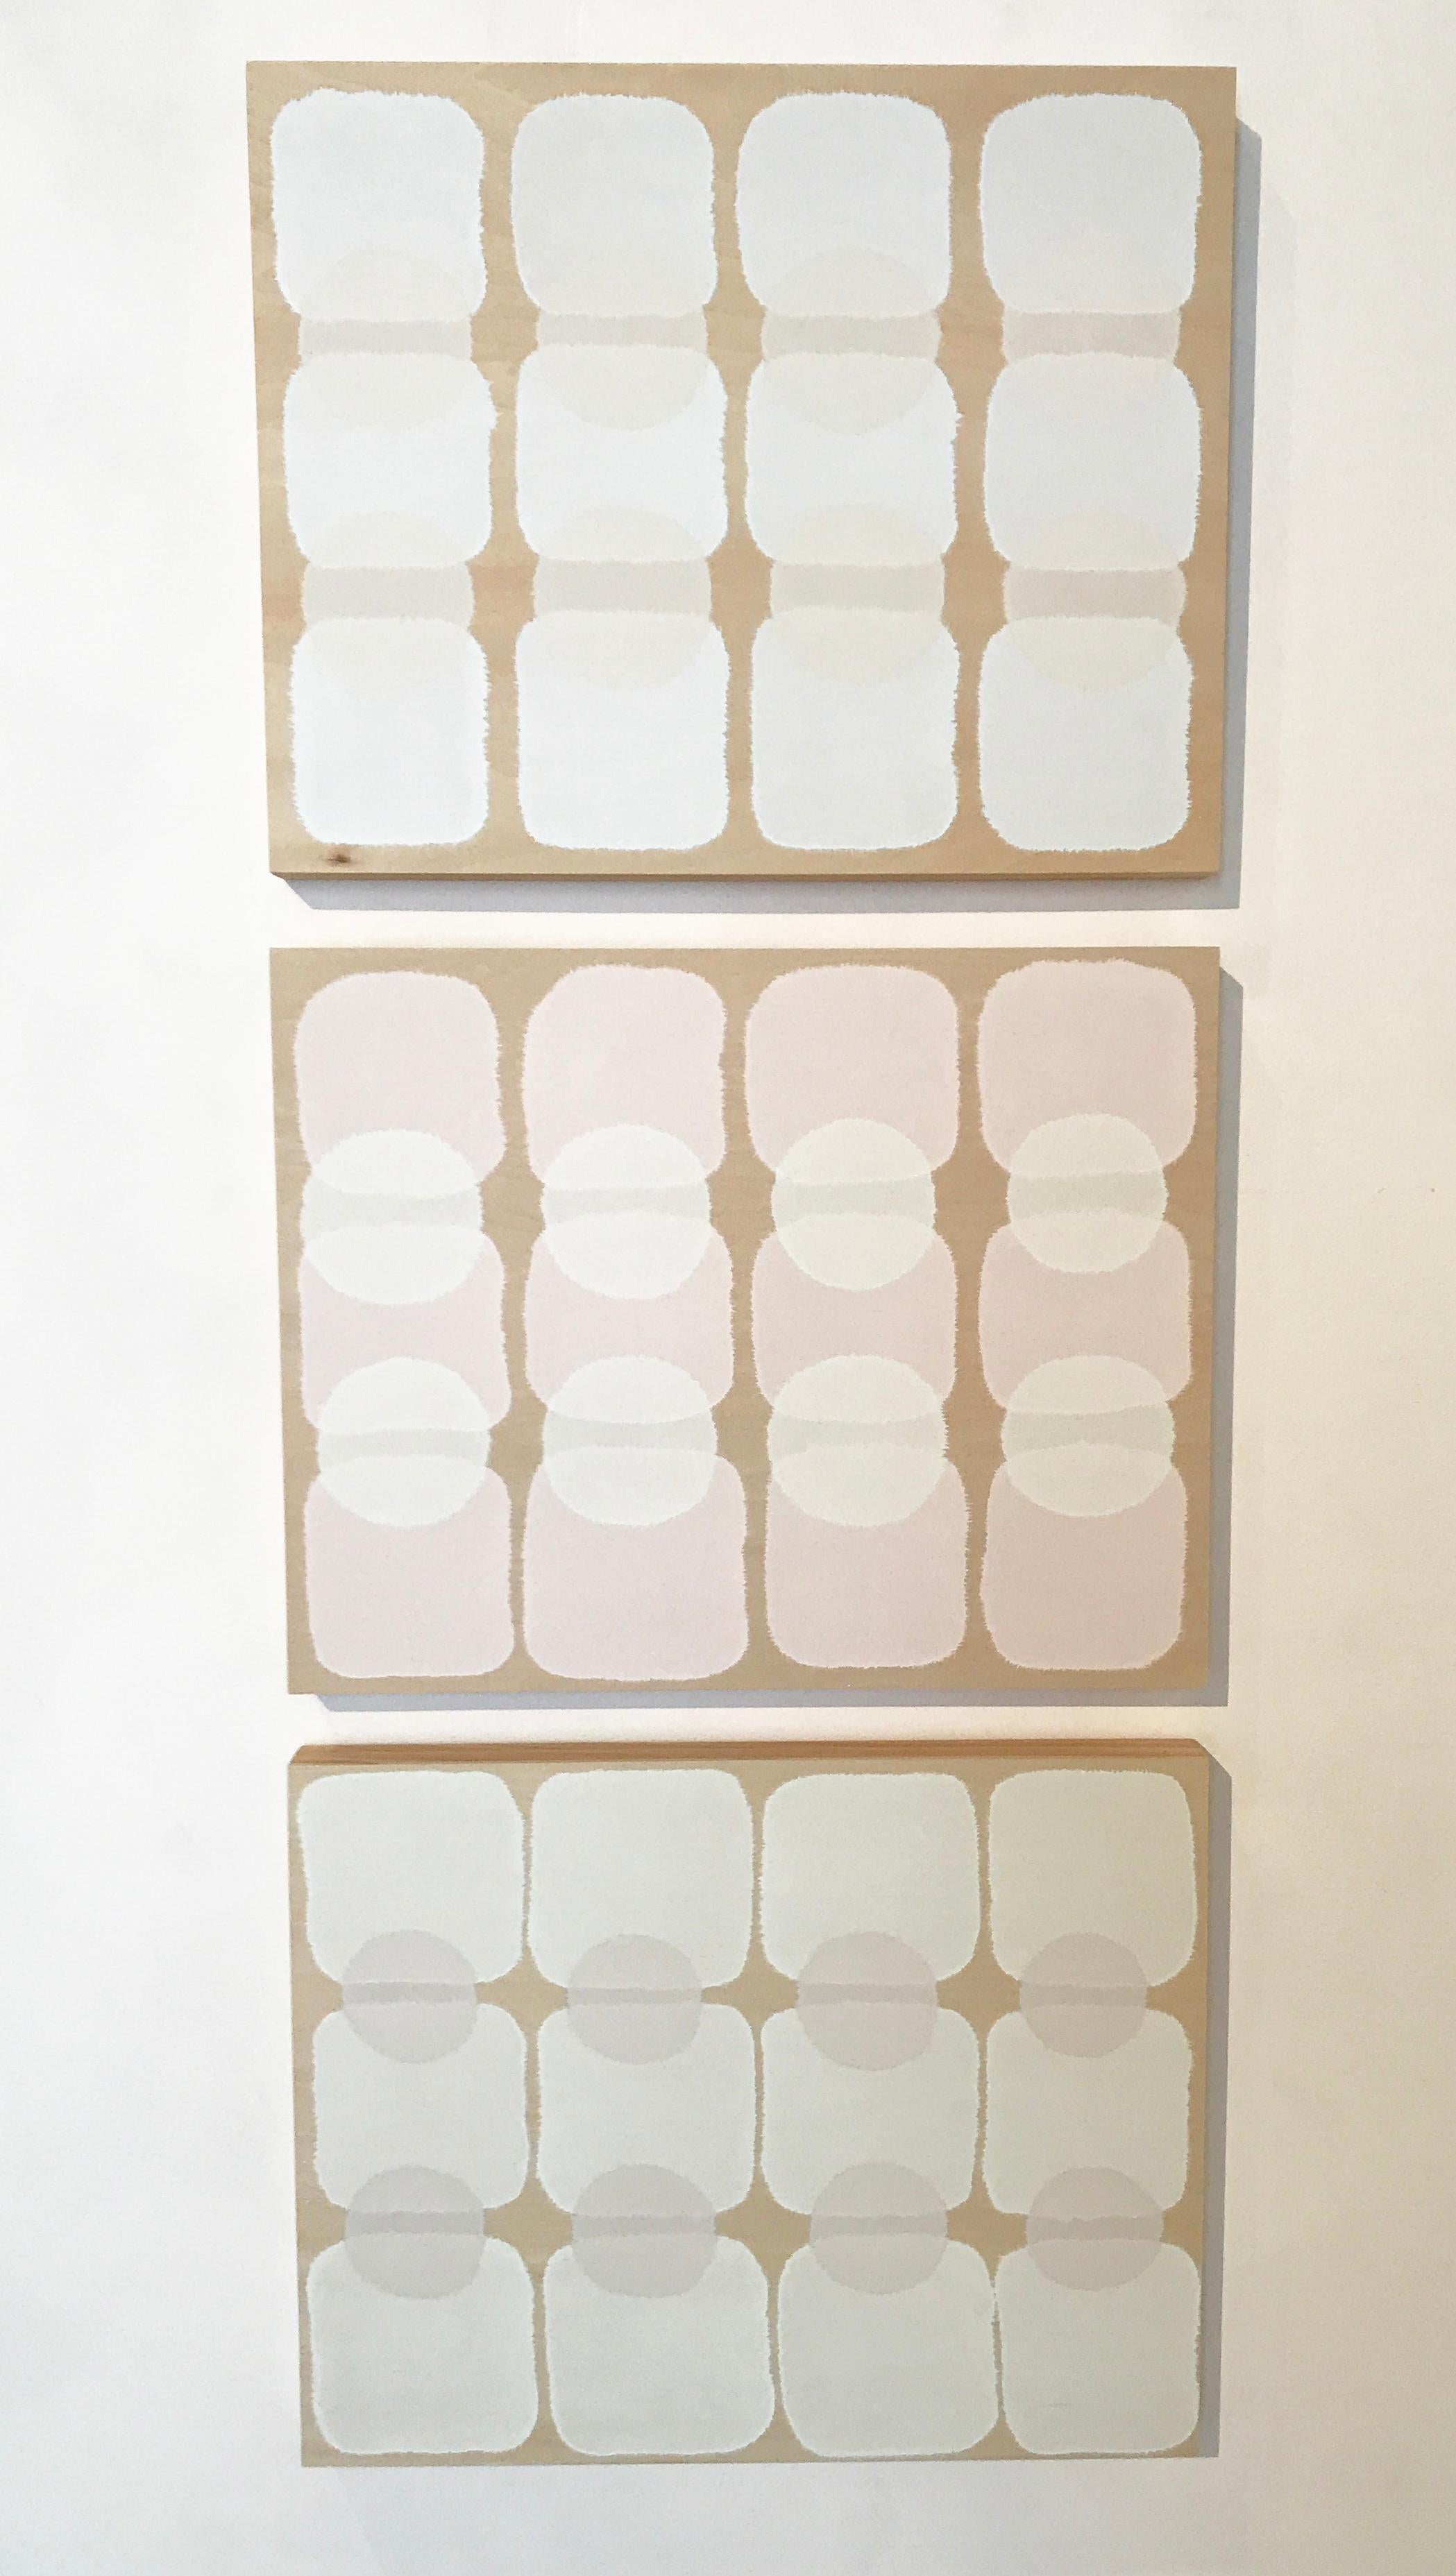 Marion Wesson
Blank Slate 1, 2018
Acrylic on birch panel
16h x 20w in

This work will be included in the group exhibition Bread & Butter at Galleri Urbane, Dallas.

DALLAS – Galleri Urbane is pleased to present a group exhibition titled Bread &